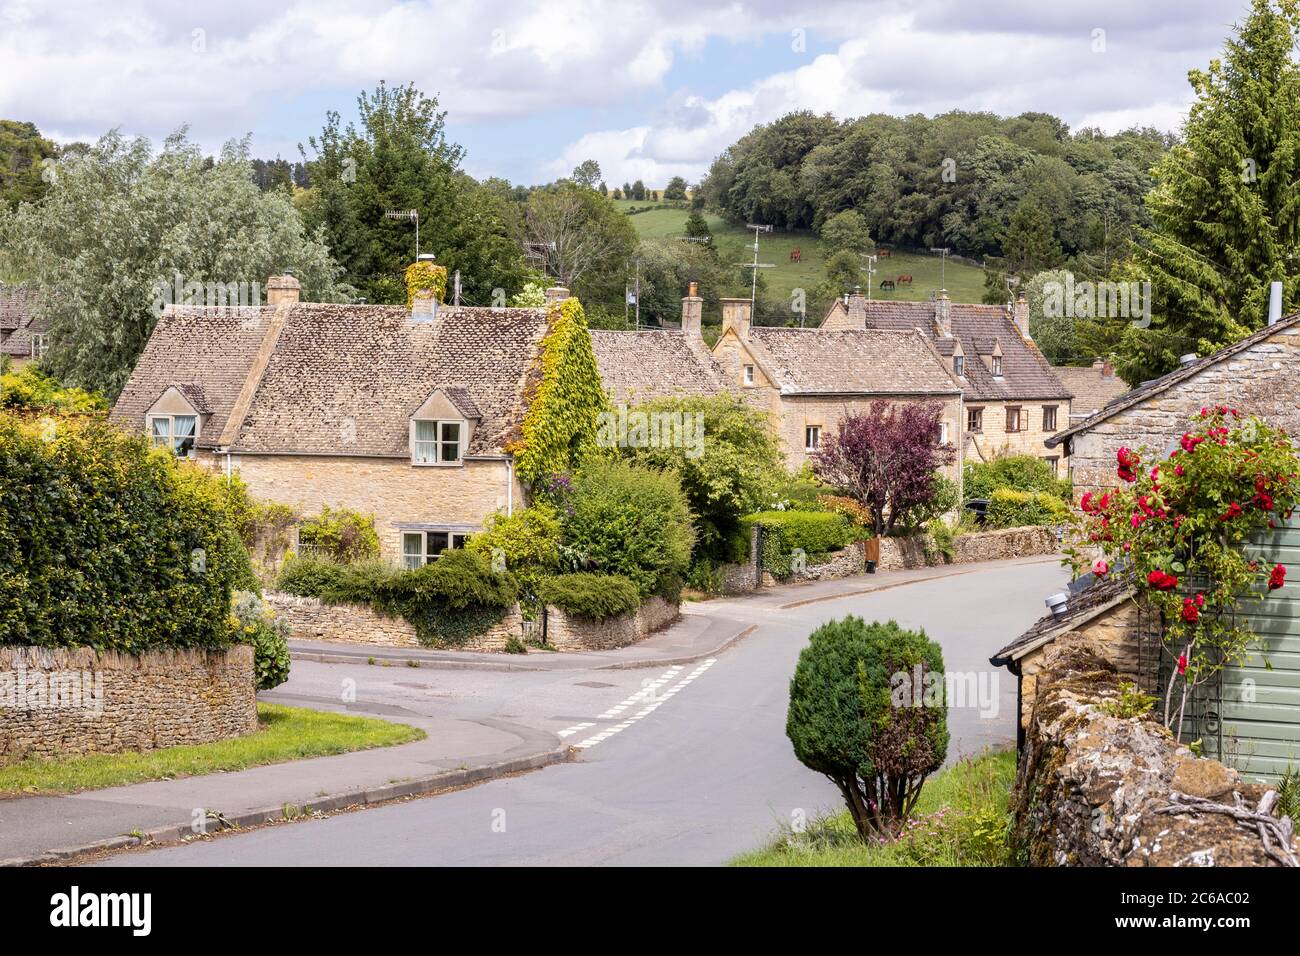 Old stone cottages in the Cotswold village of Naunton, Gloucestershire UK Stock Photo